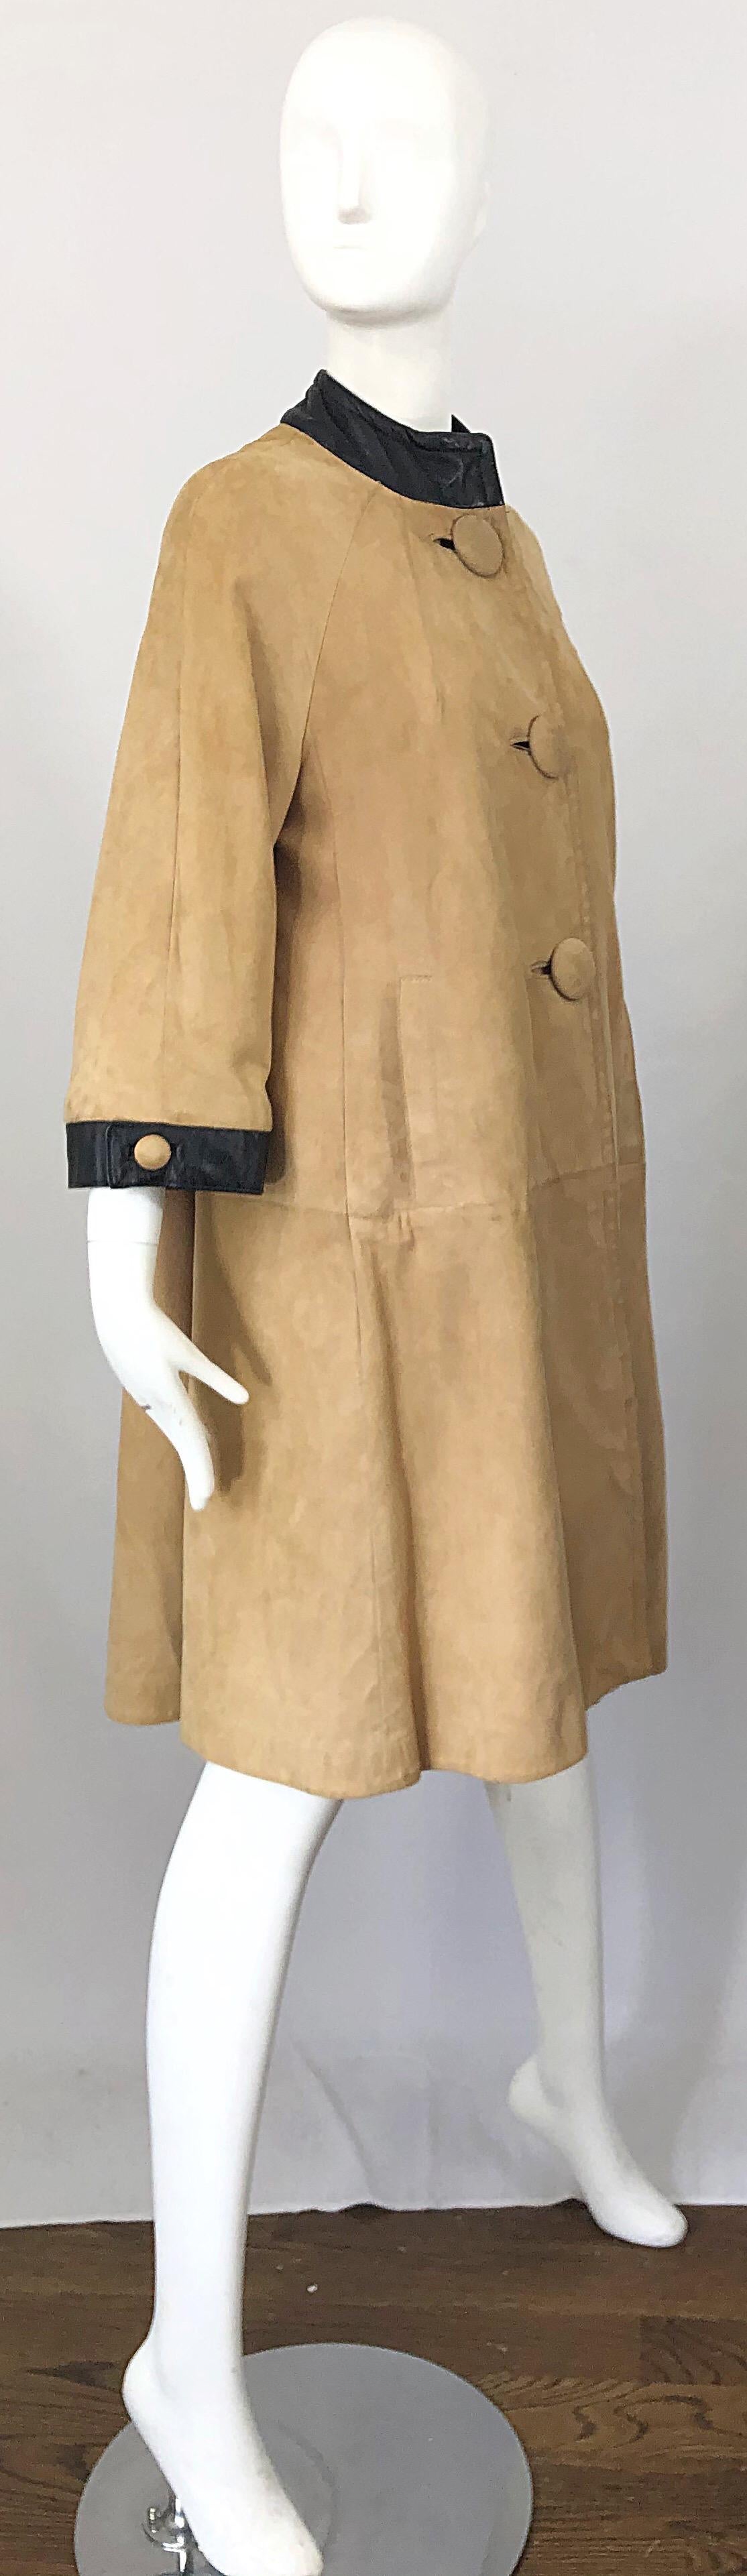 Women's 1960s Lillie Rubin Tan + Black Suede and Leather Vintage 60s Swing Jacket Coat